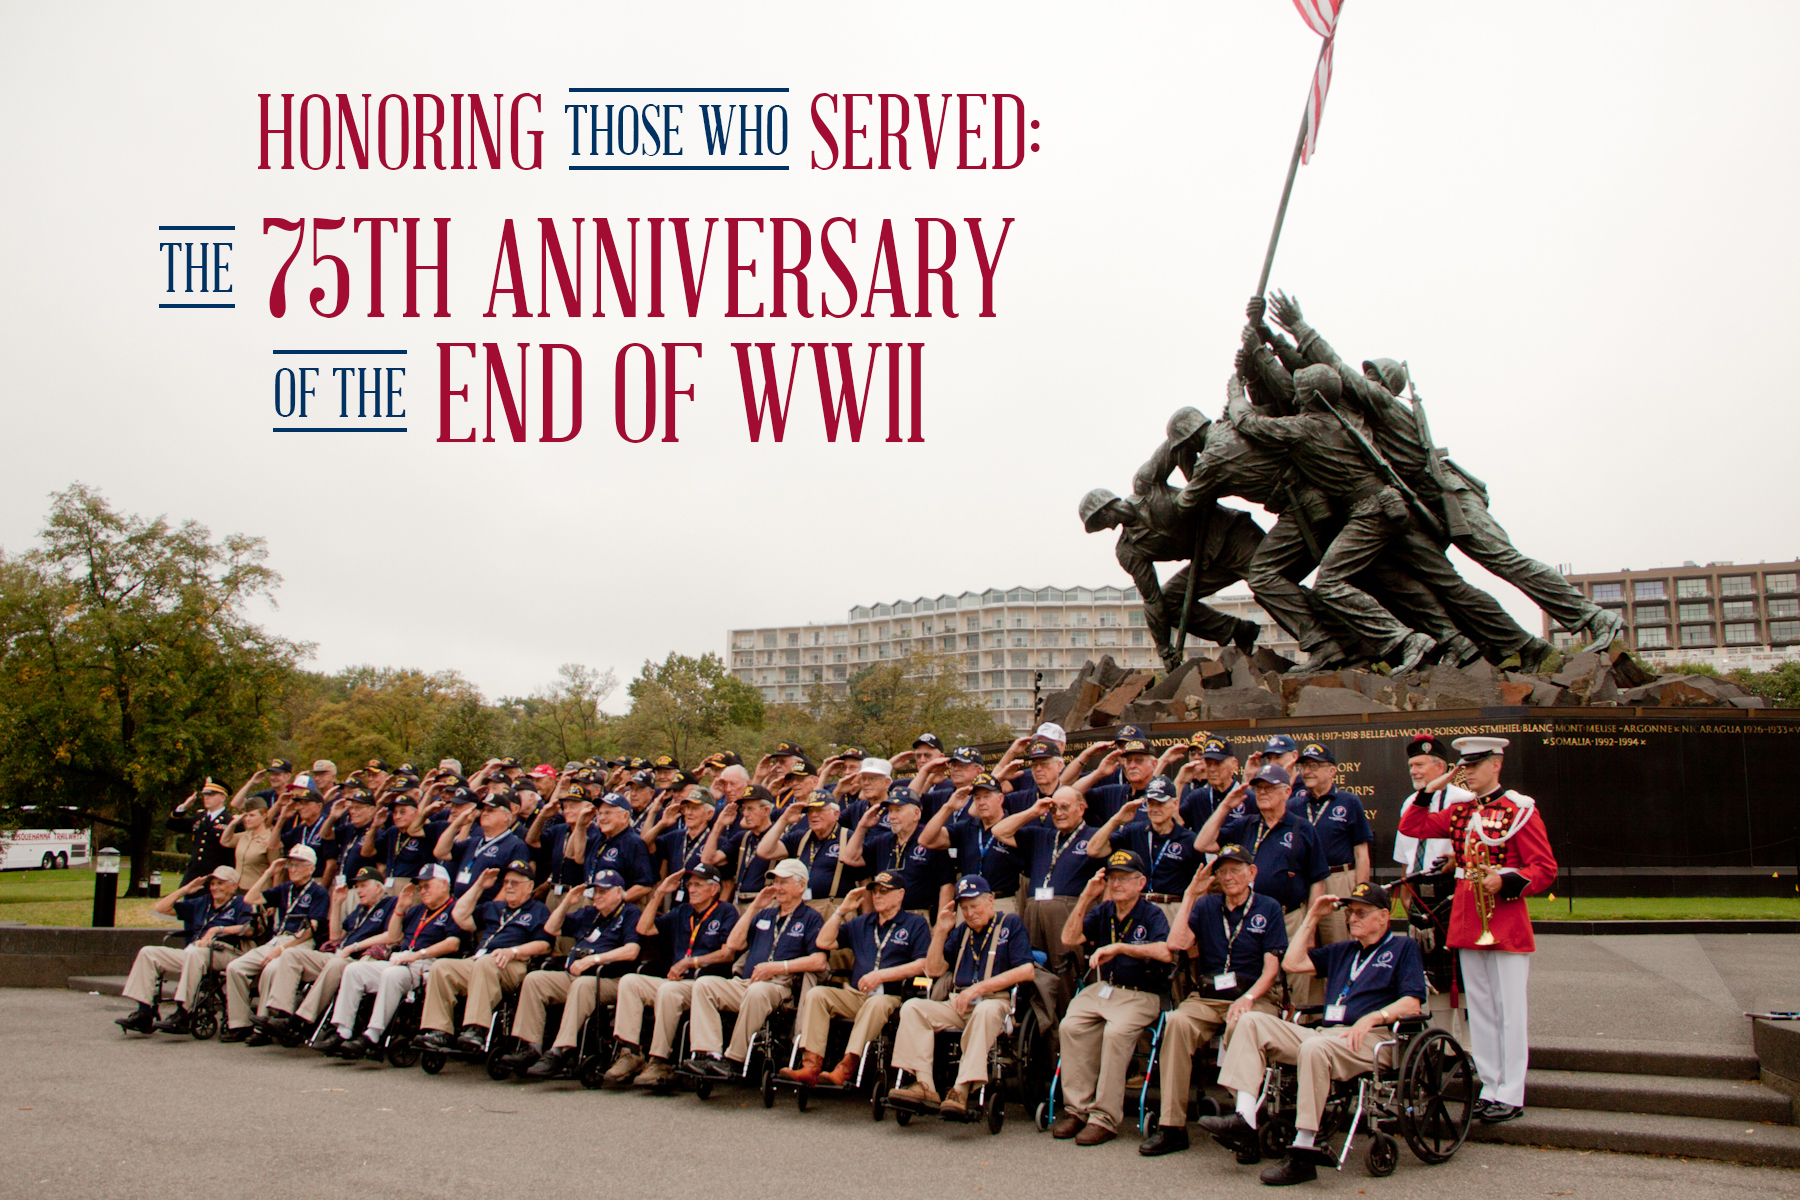 Honoring Those Who Servied: the 75th Anniversary of the End of World War II